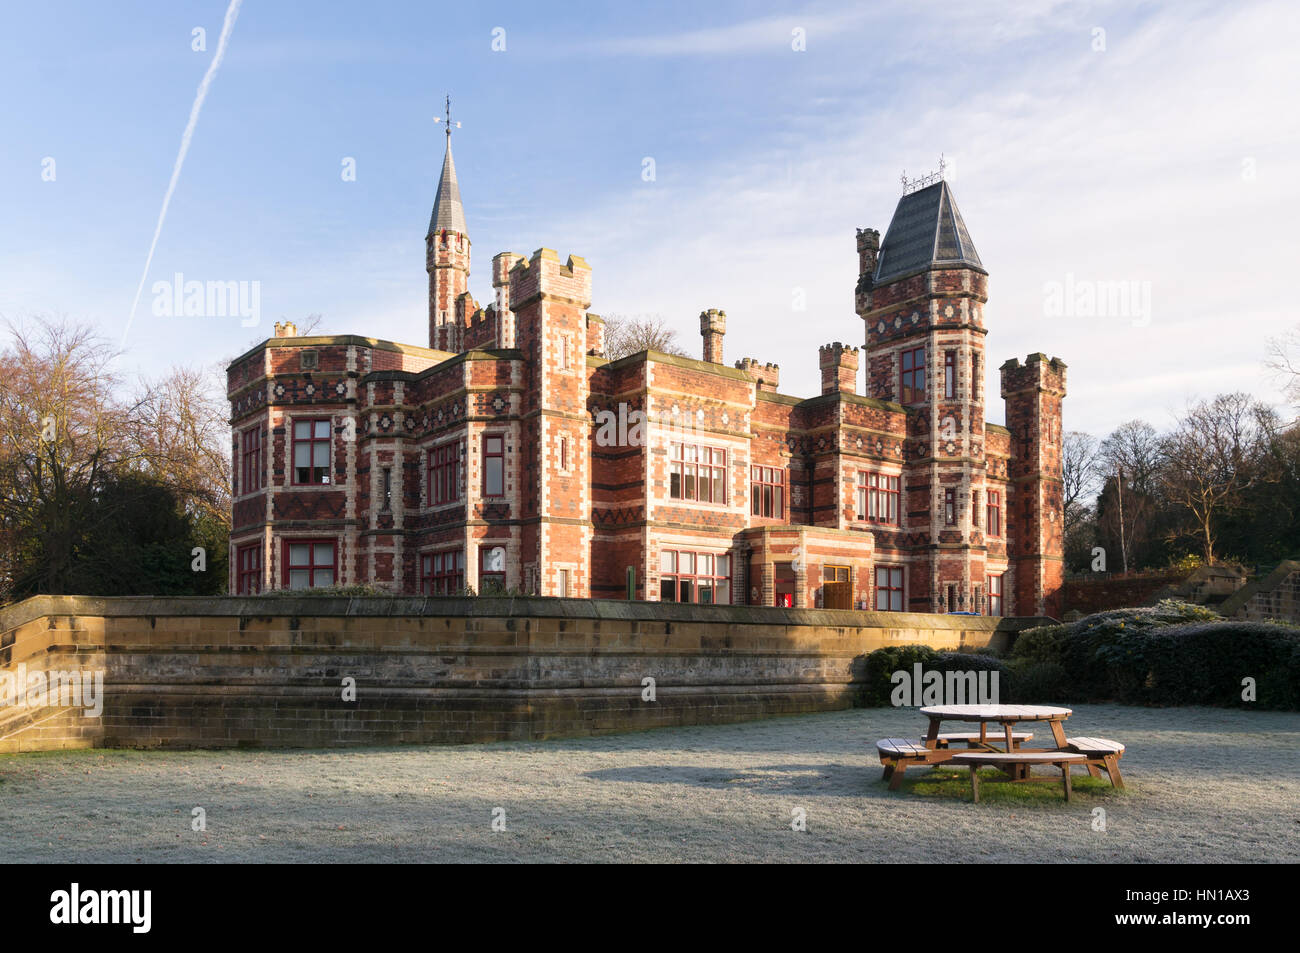 Saltwell Towers Victorian gothic mansion in Saltwell Park on a frosty winter's day, Gateshead, England, UK Stock Photo